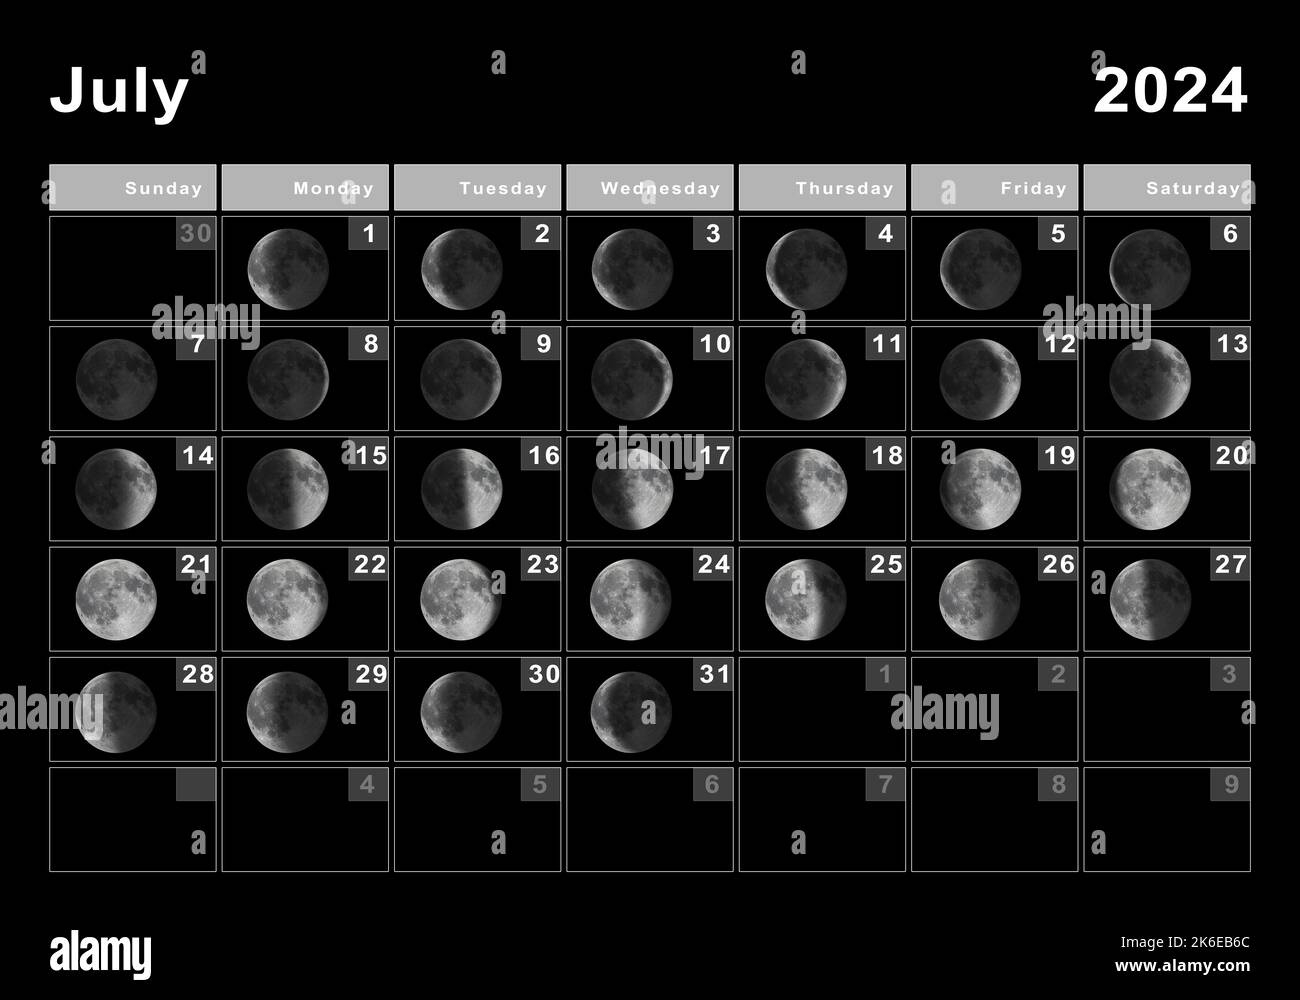 July 2024 Lunar Calendar, Moon Cycles, Moon Phases Stock Photo - Alamy with regard to July Moon Calendar 2024